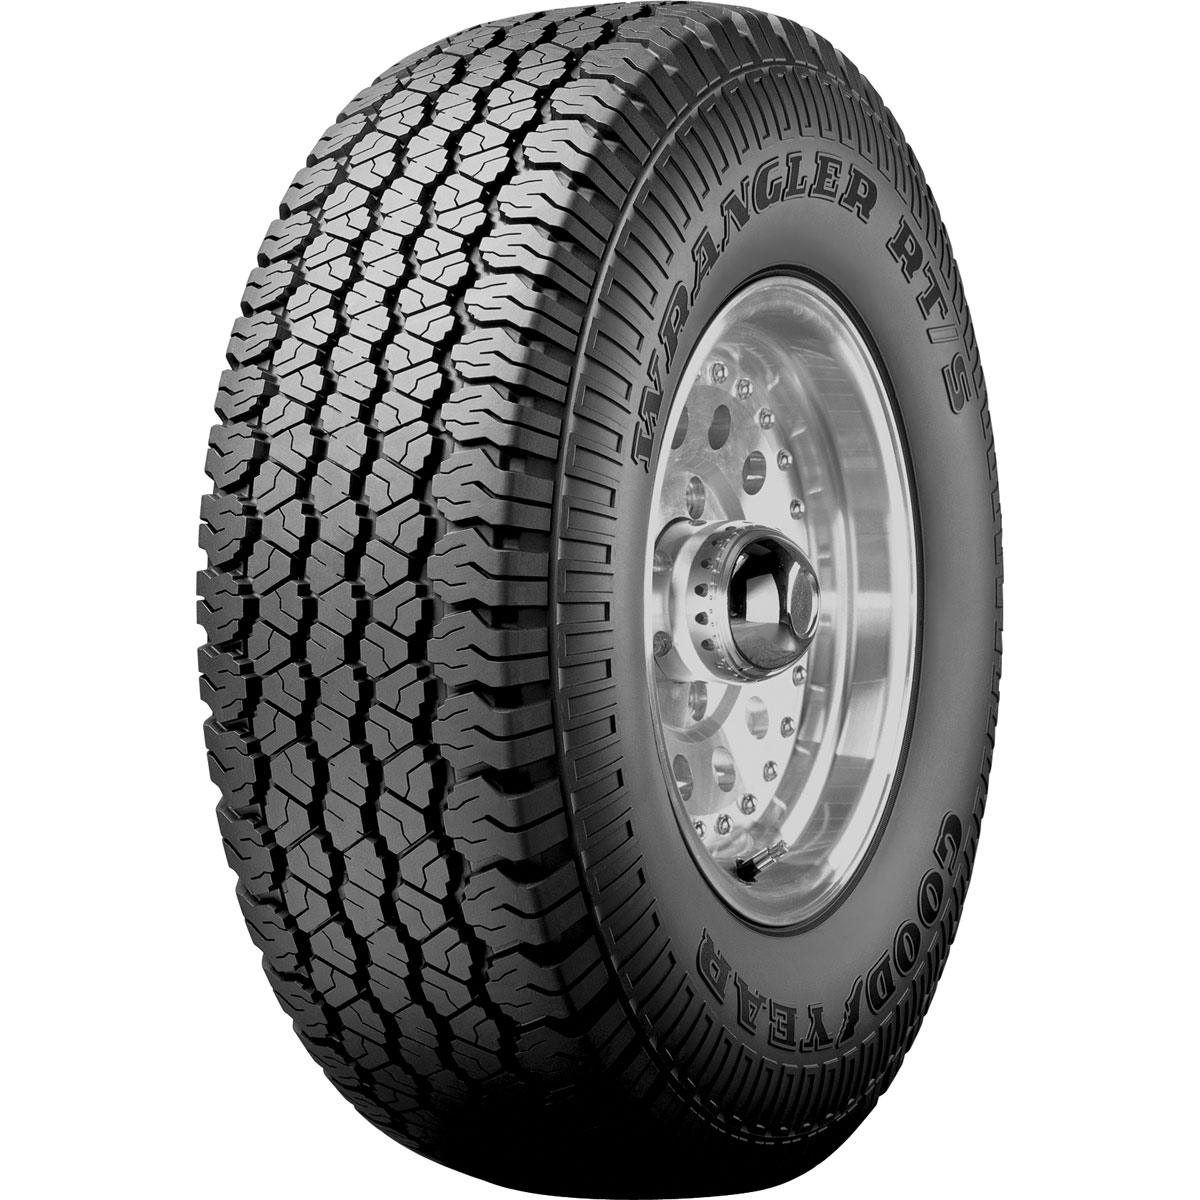 Goodyear Wrangler Rt/s | What Tyre | Independent tyre comparison